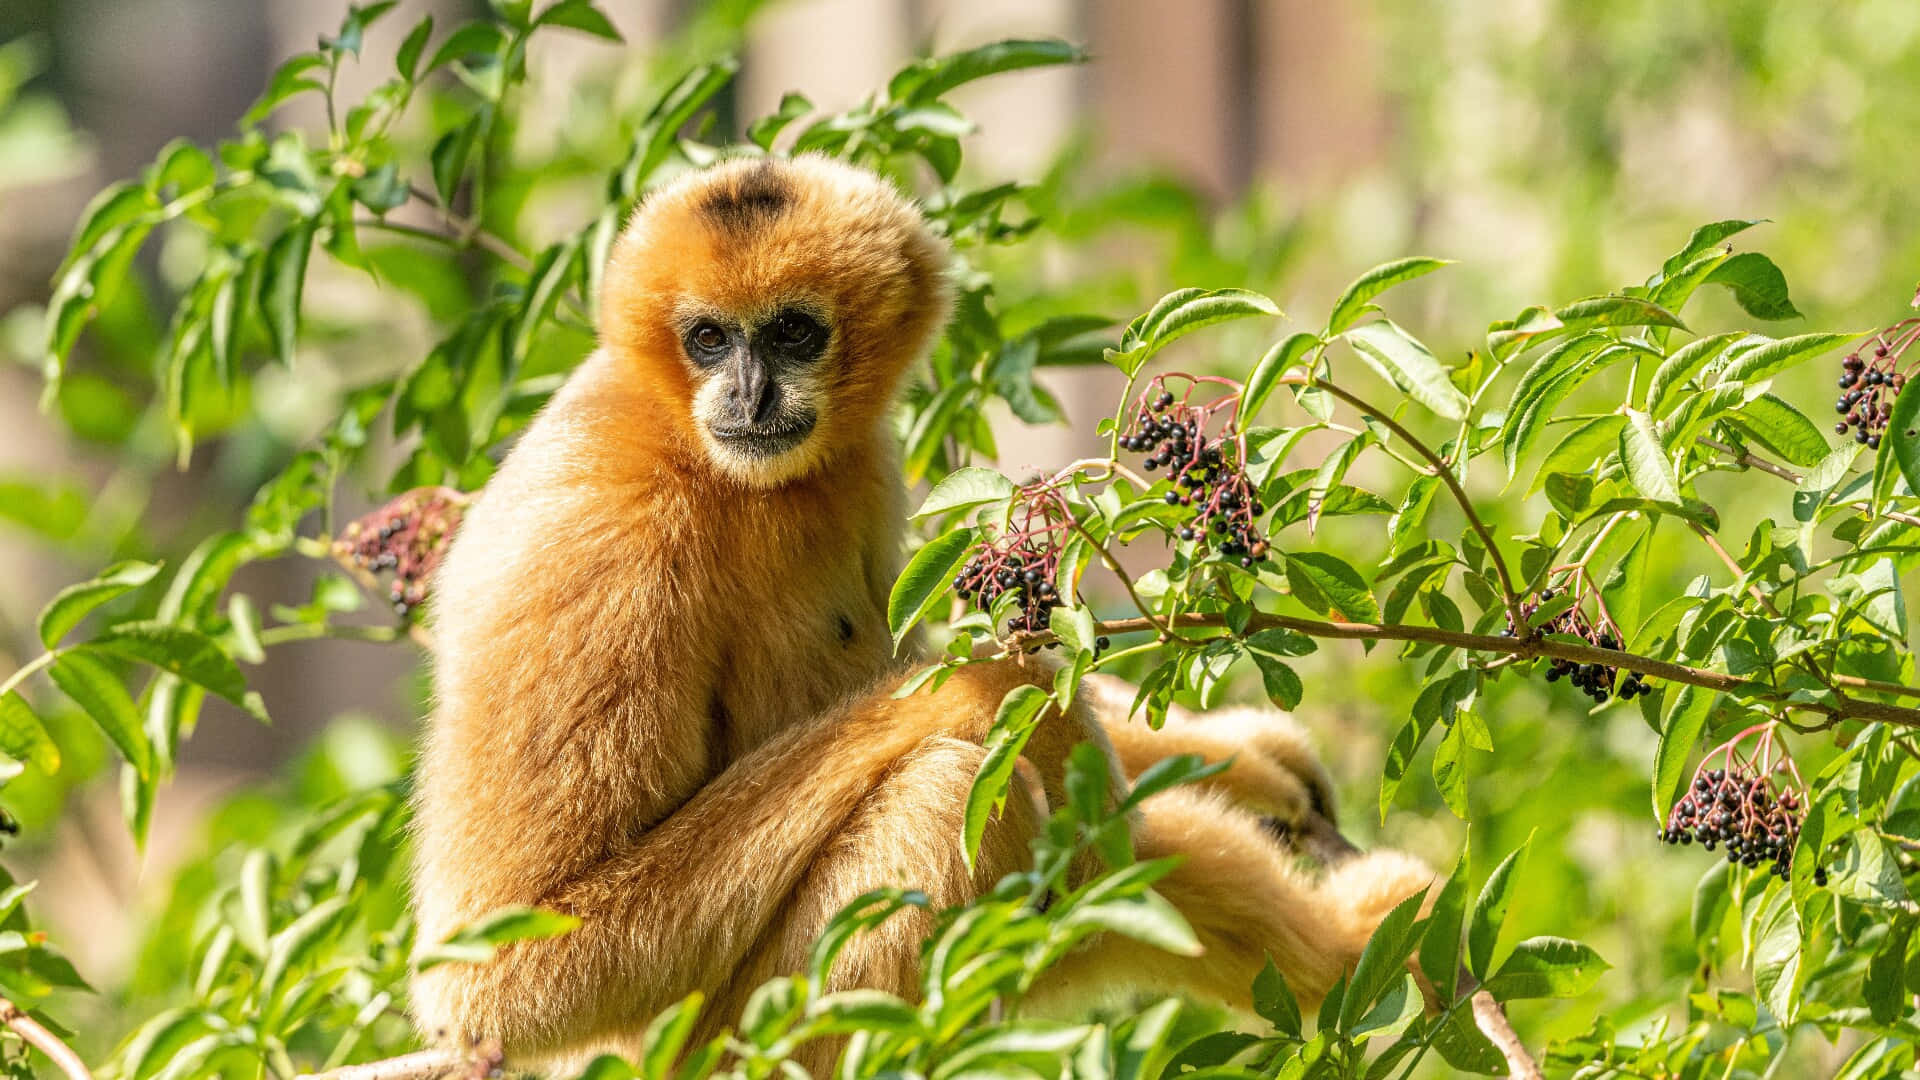 A lone gibbon hangs from branch in a jungle setting.